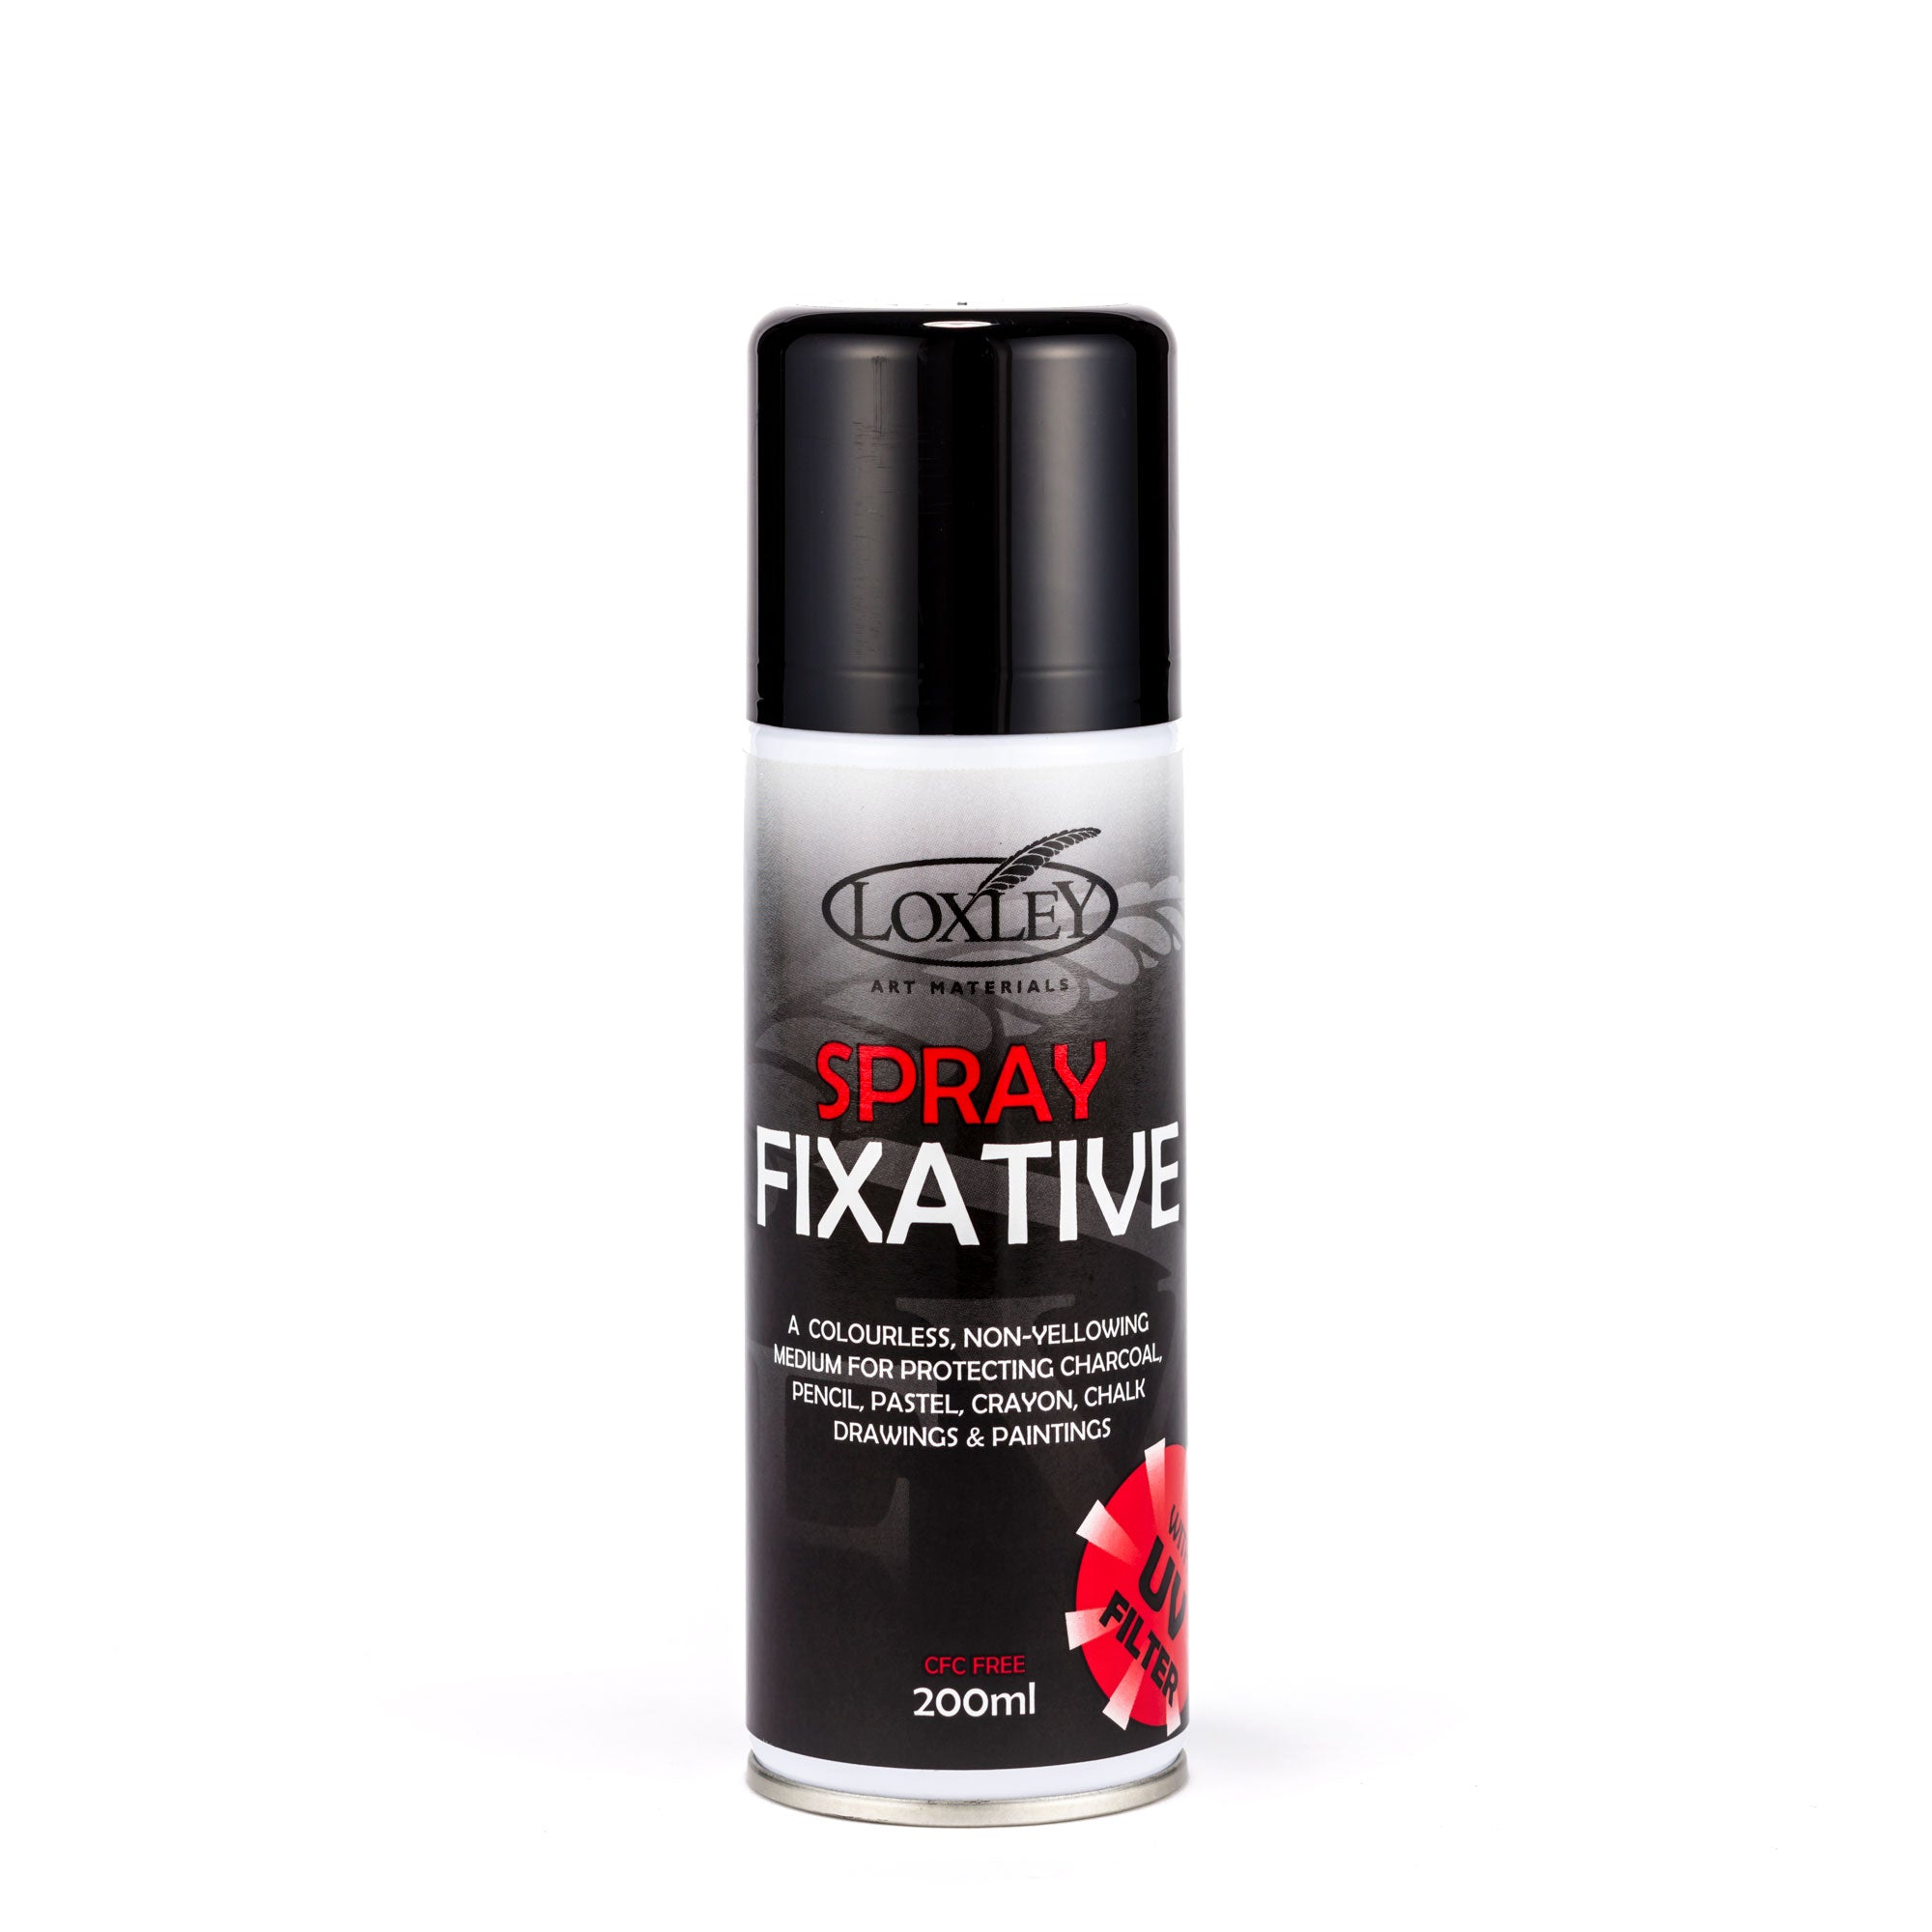 Loxley Artist's Fixative – UV, Smudge and humidity protection